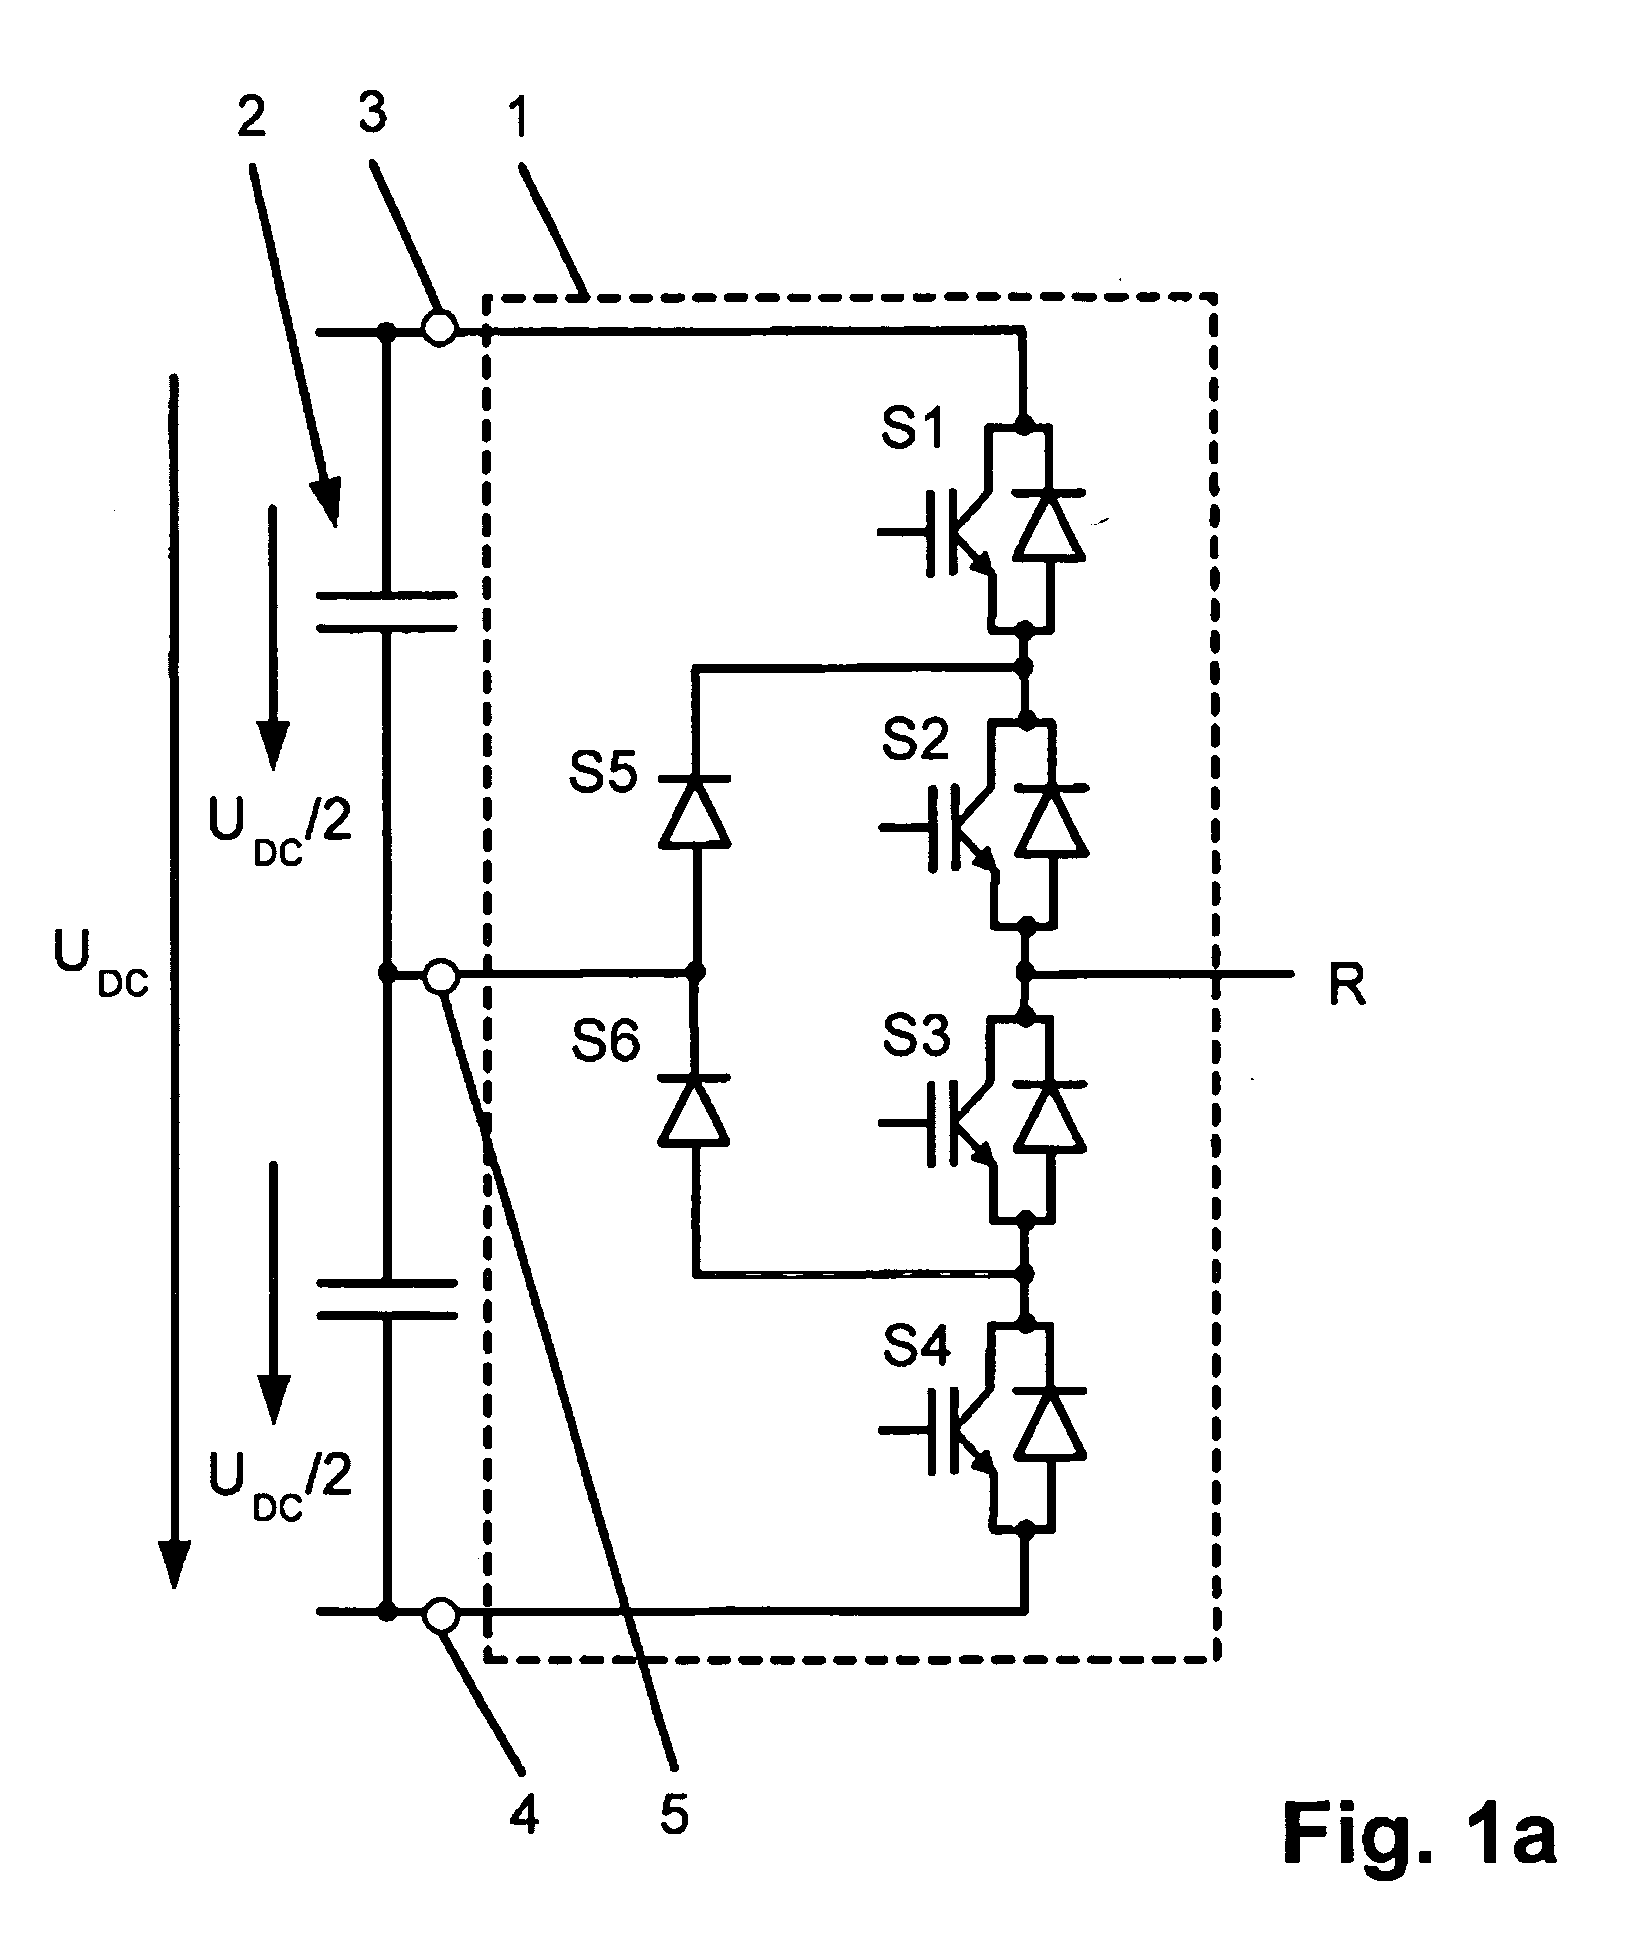 Method for fault handling in a converter circuit for wiring of three voltage levels